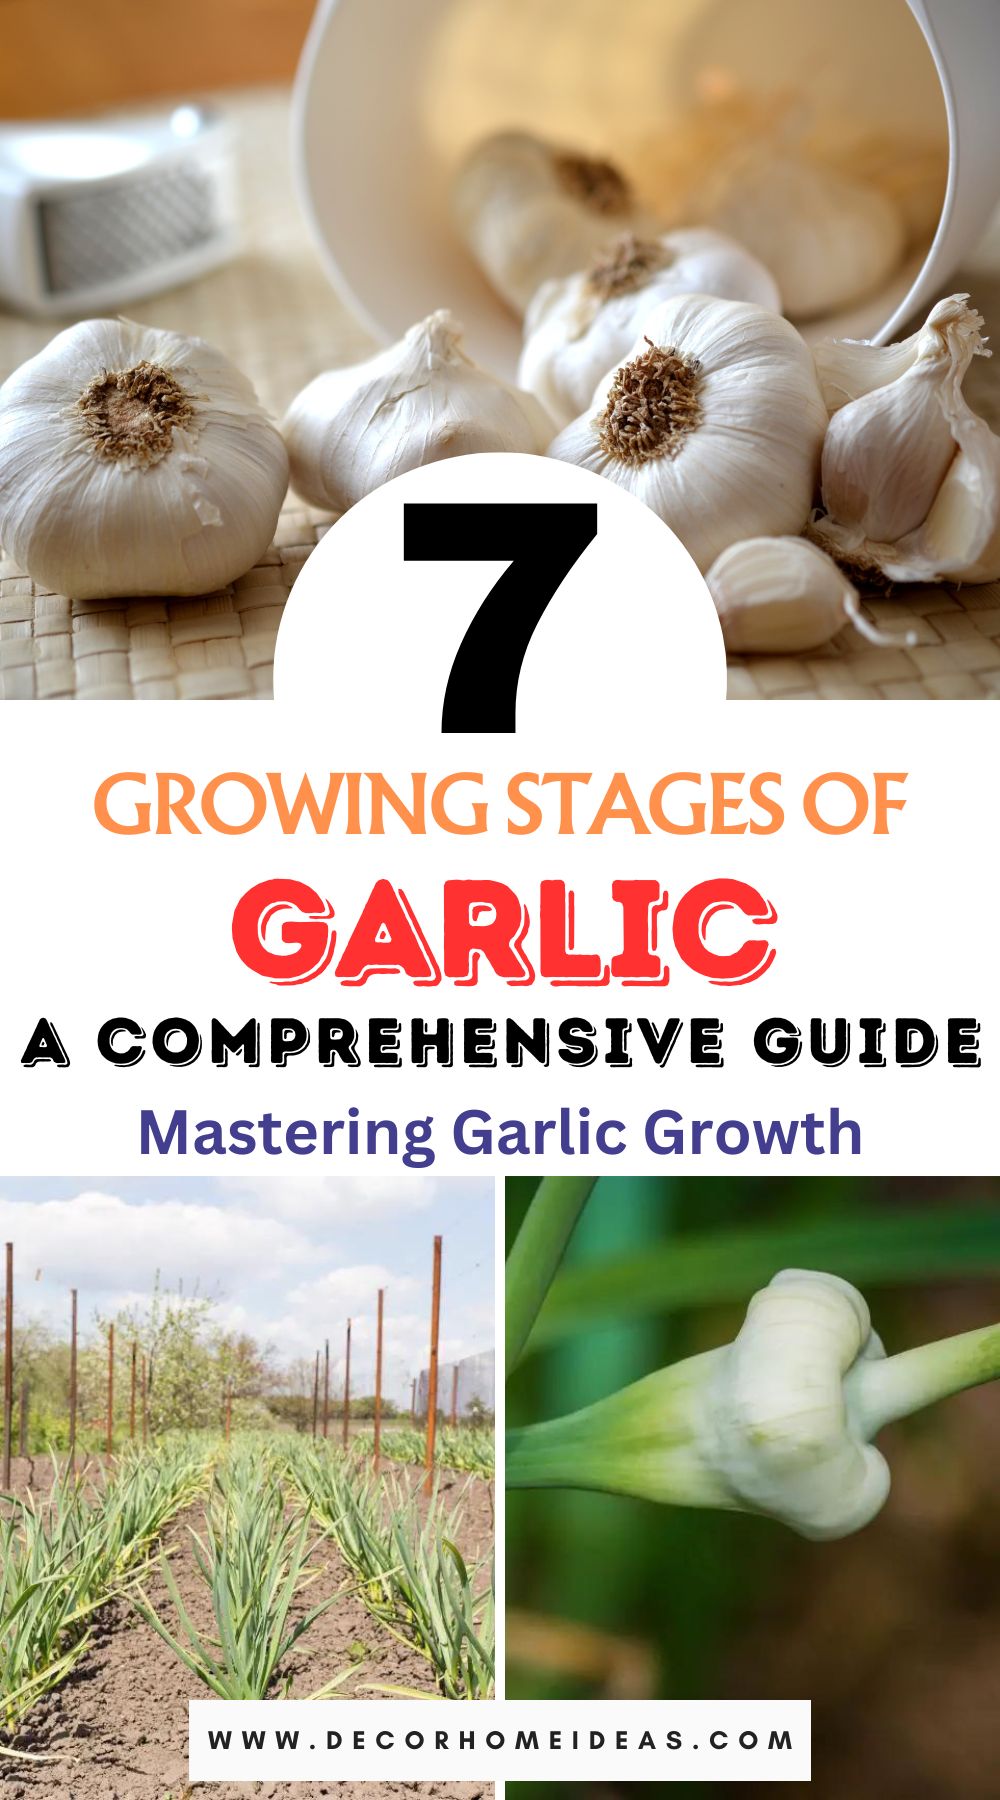 Master the art of growing garlic with our comprehensive guide to the 7 garlic growing stages. From planting to harvesting, explore each crucial step for a successful garlic harvest.